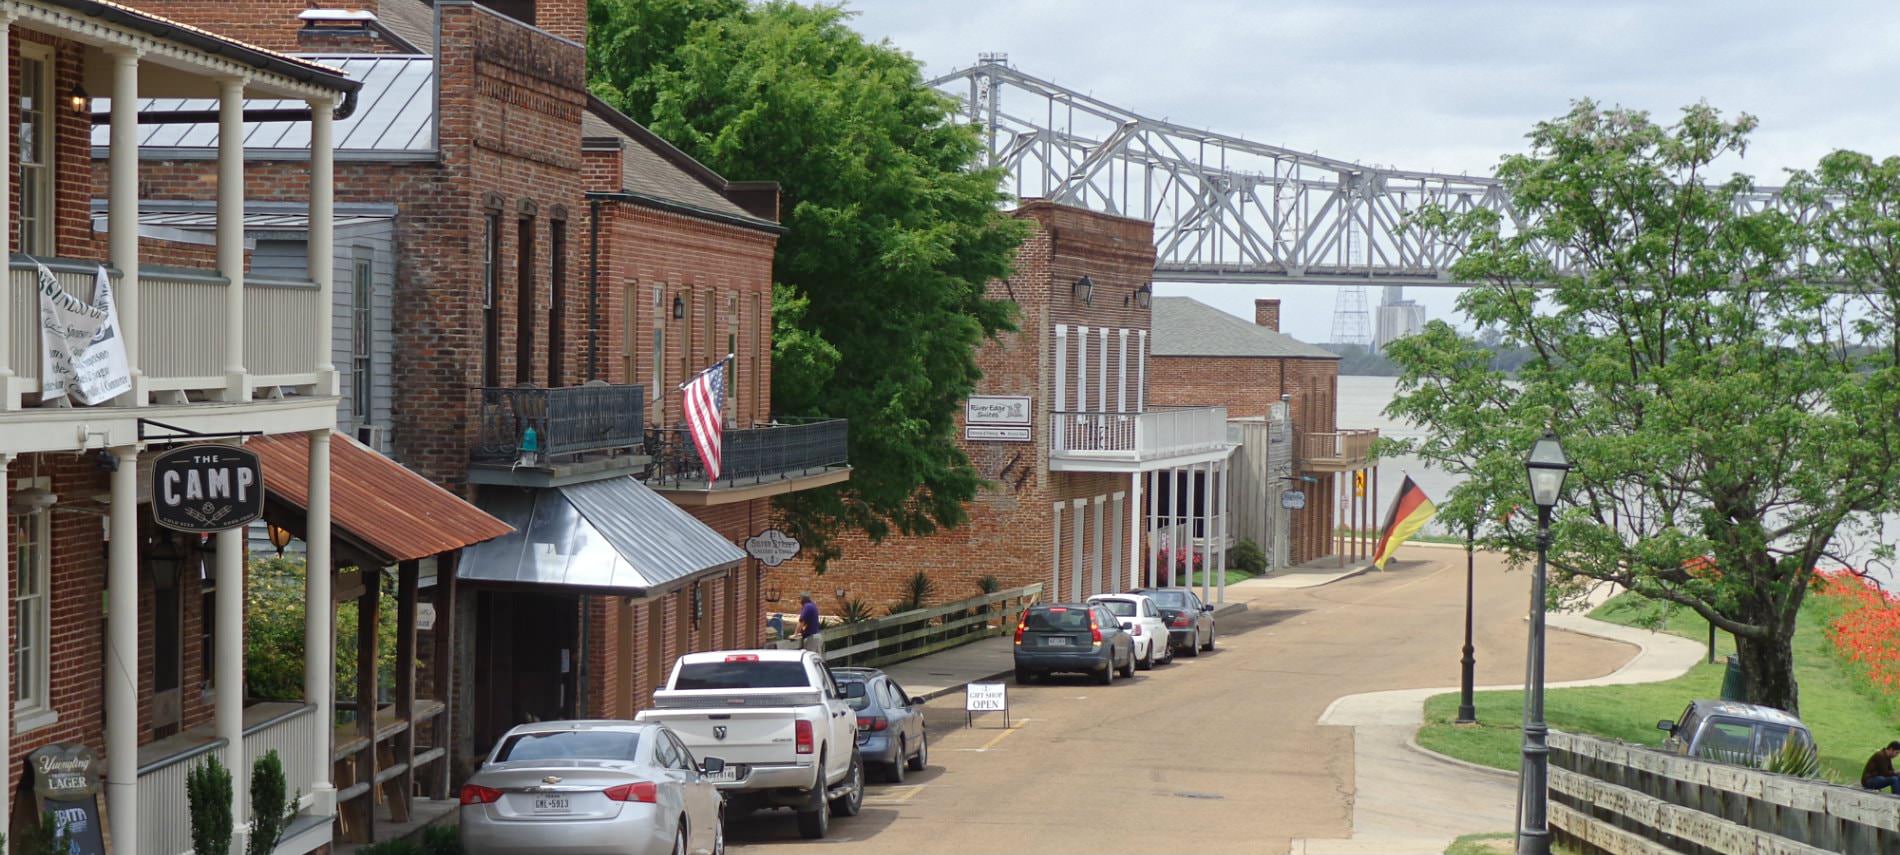 Red brick buildings with store fronts next to a river and bridge